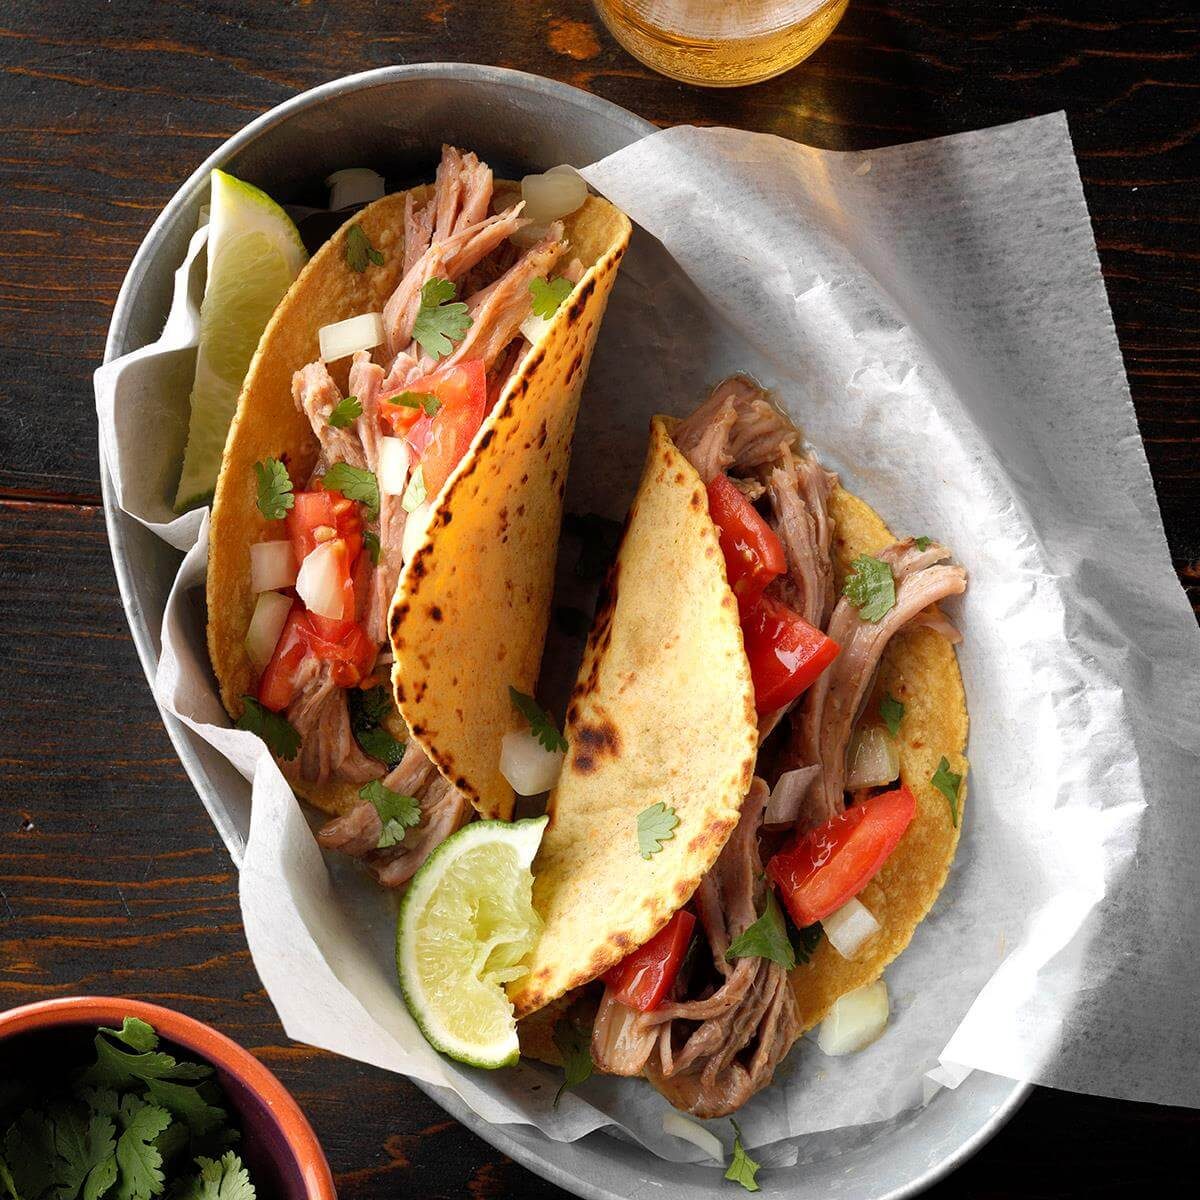 8 Items You Should Always Have on Taco Tuesday